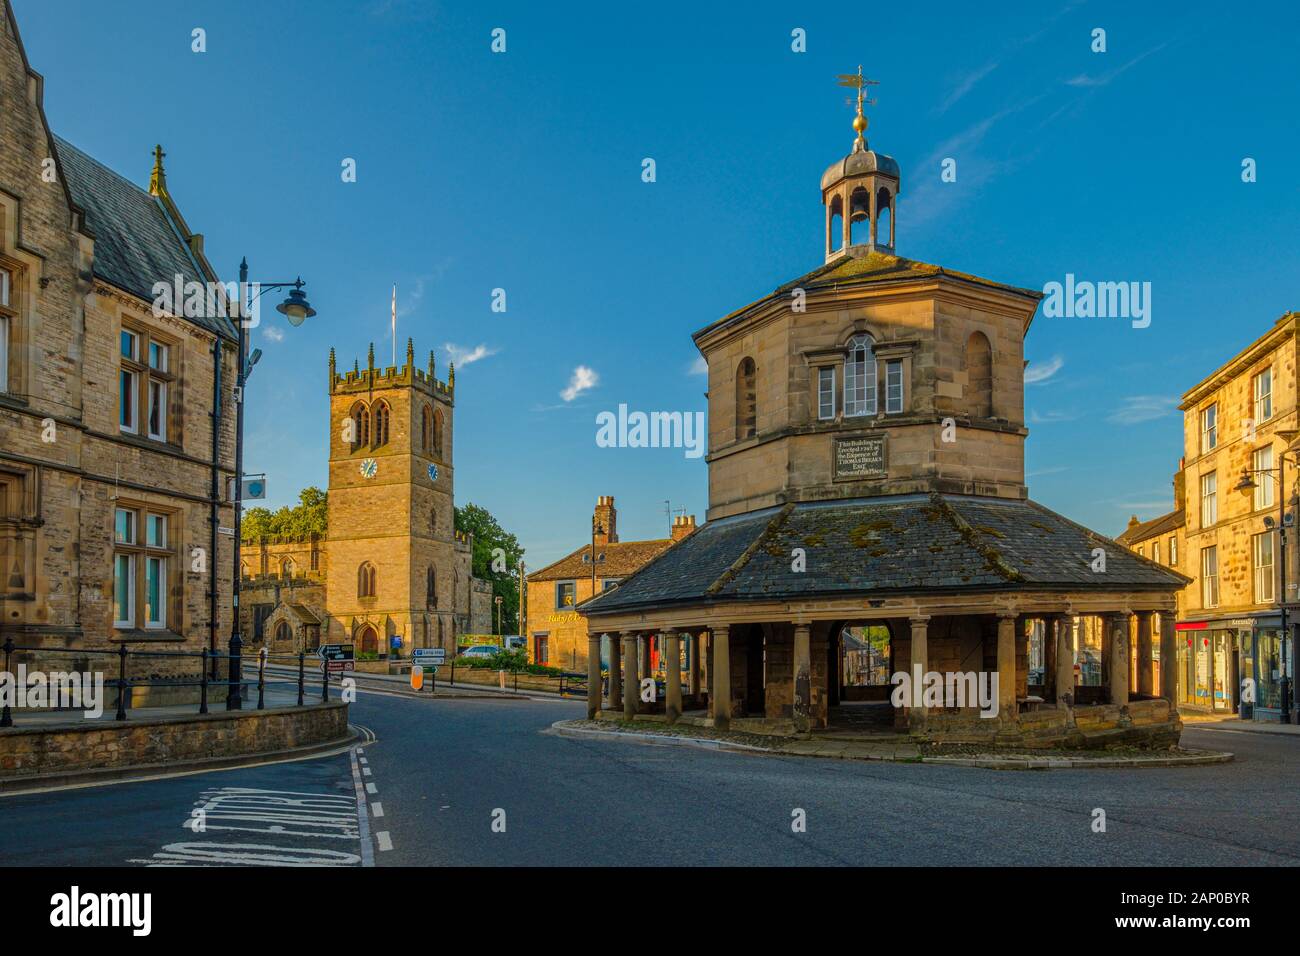 The octagonal Market Cross was a gift to the town of Barnard Castle from Thomas Breaks in 1747. Stock Photo